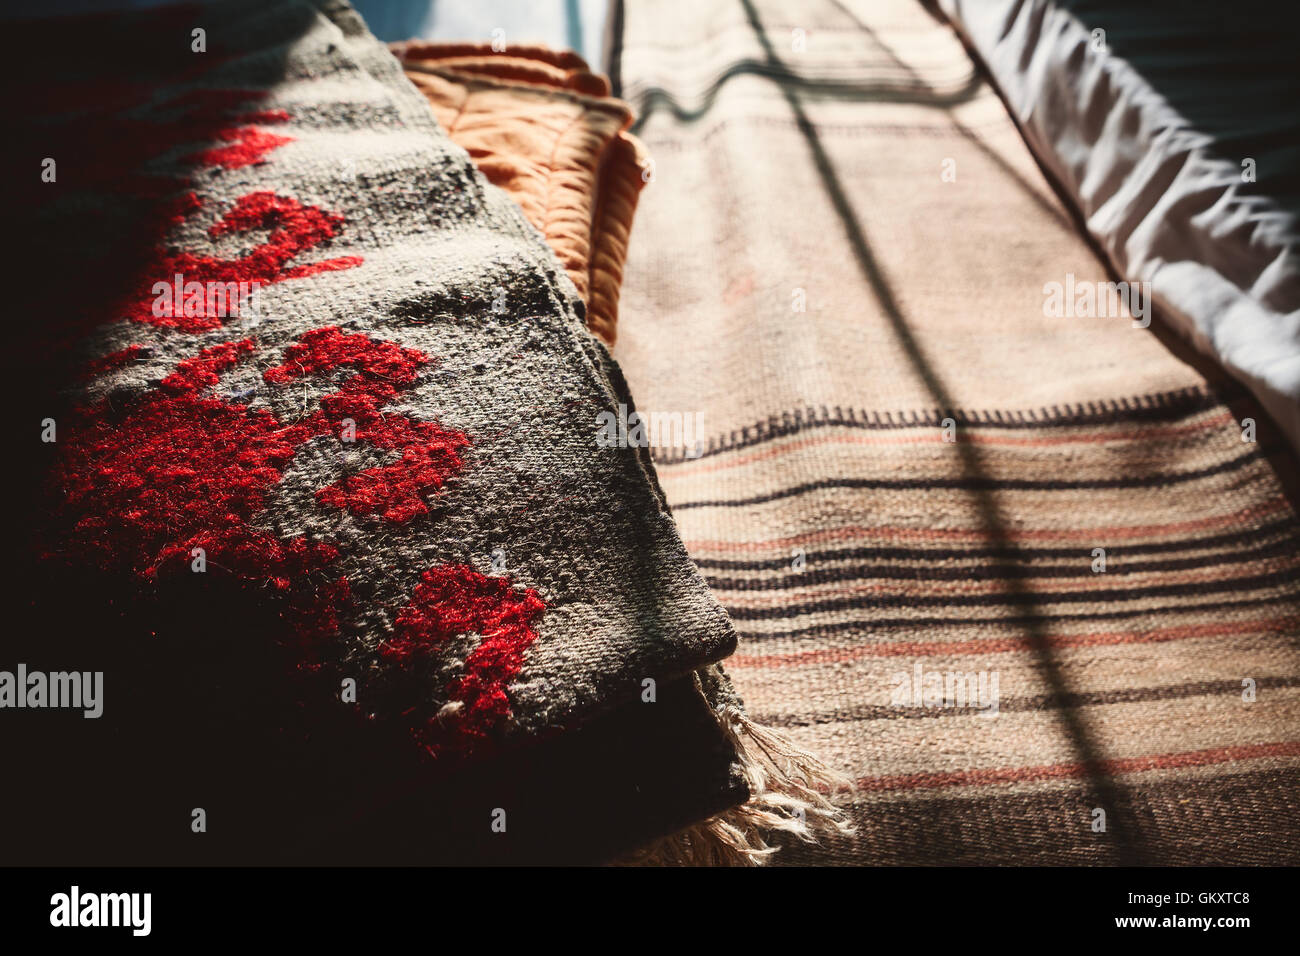 Characteristic woolen blankets from Serbia, traditional embroidery and design. Stock Photo